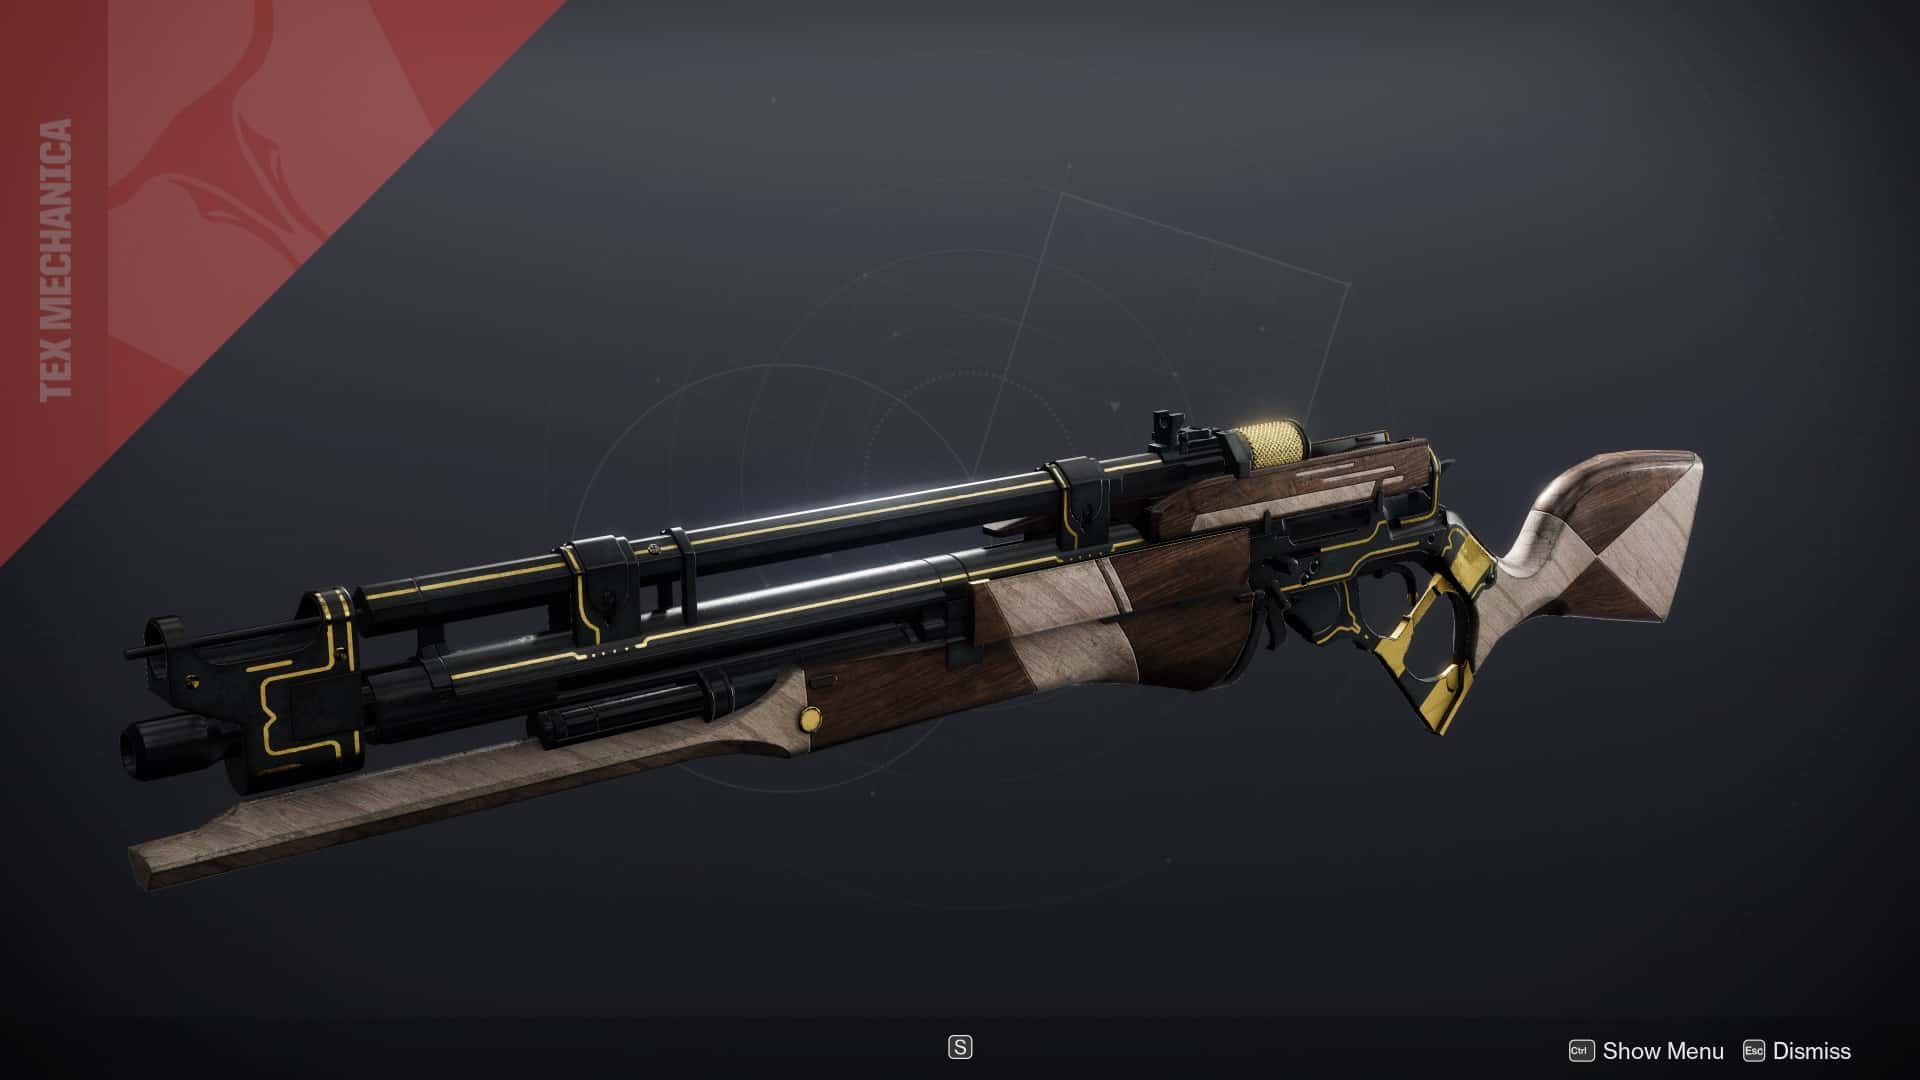 Long Arm Scout rifle featured